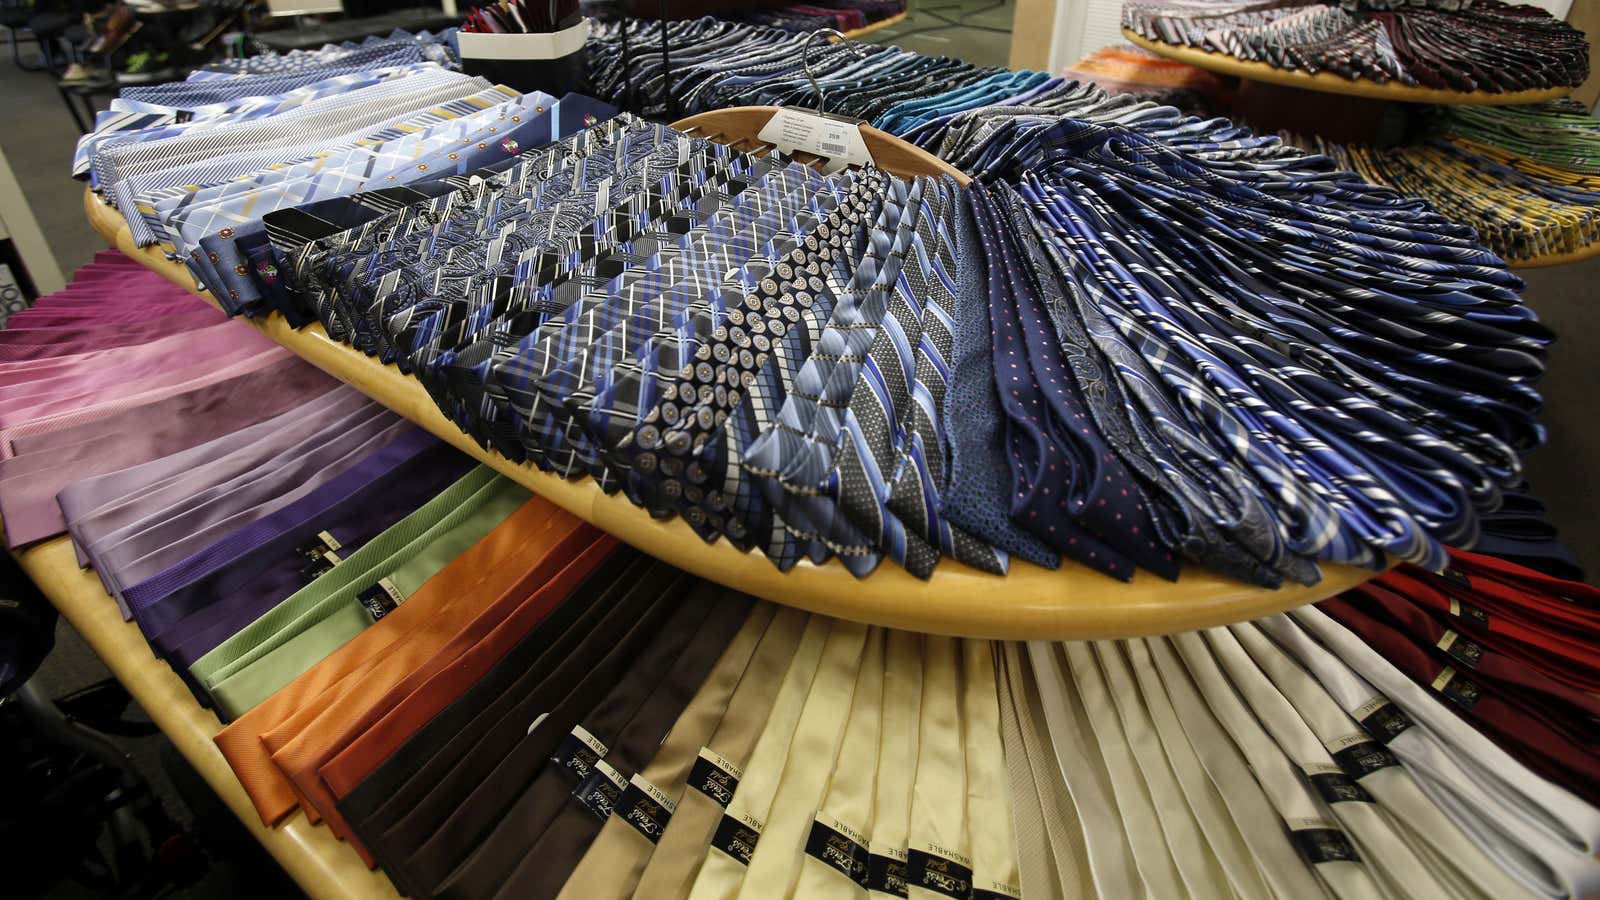 The path to widely celebrating Father’s Day was paved with neckties.